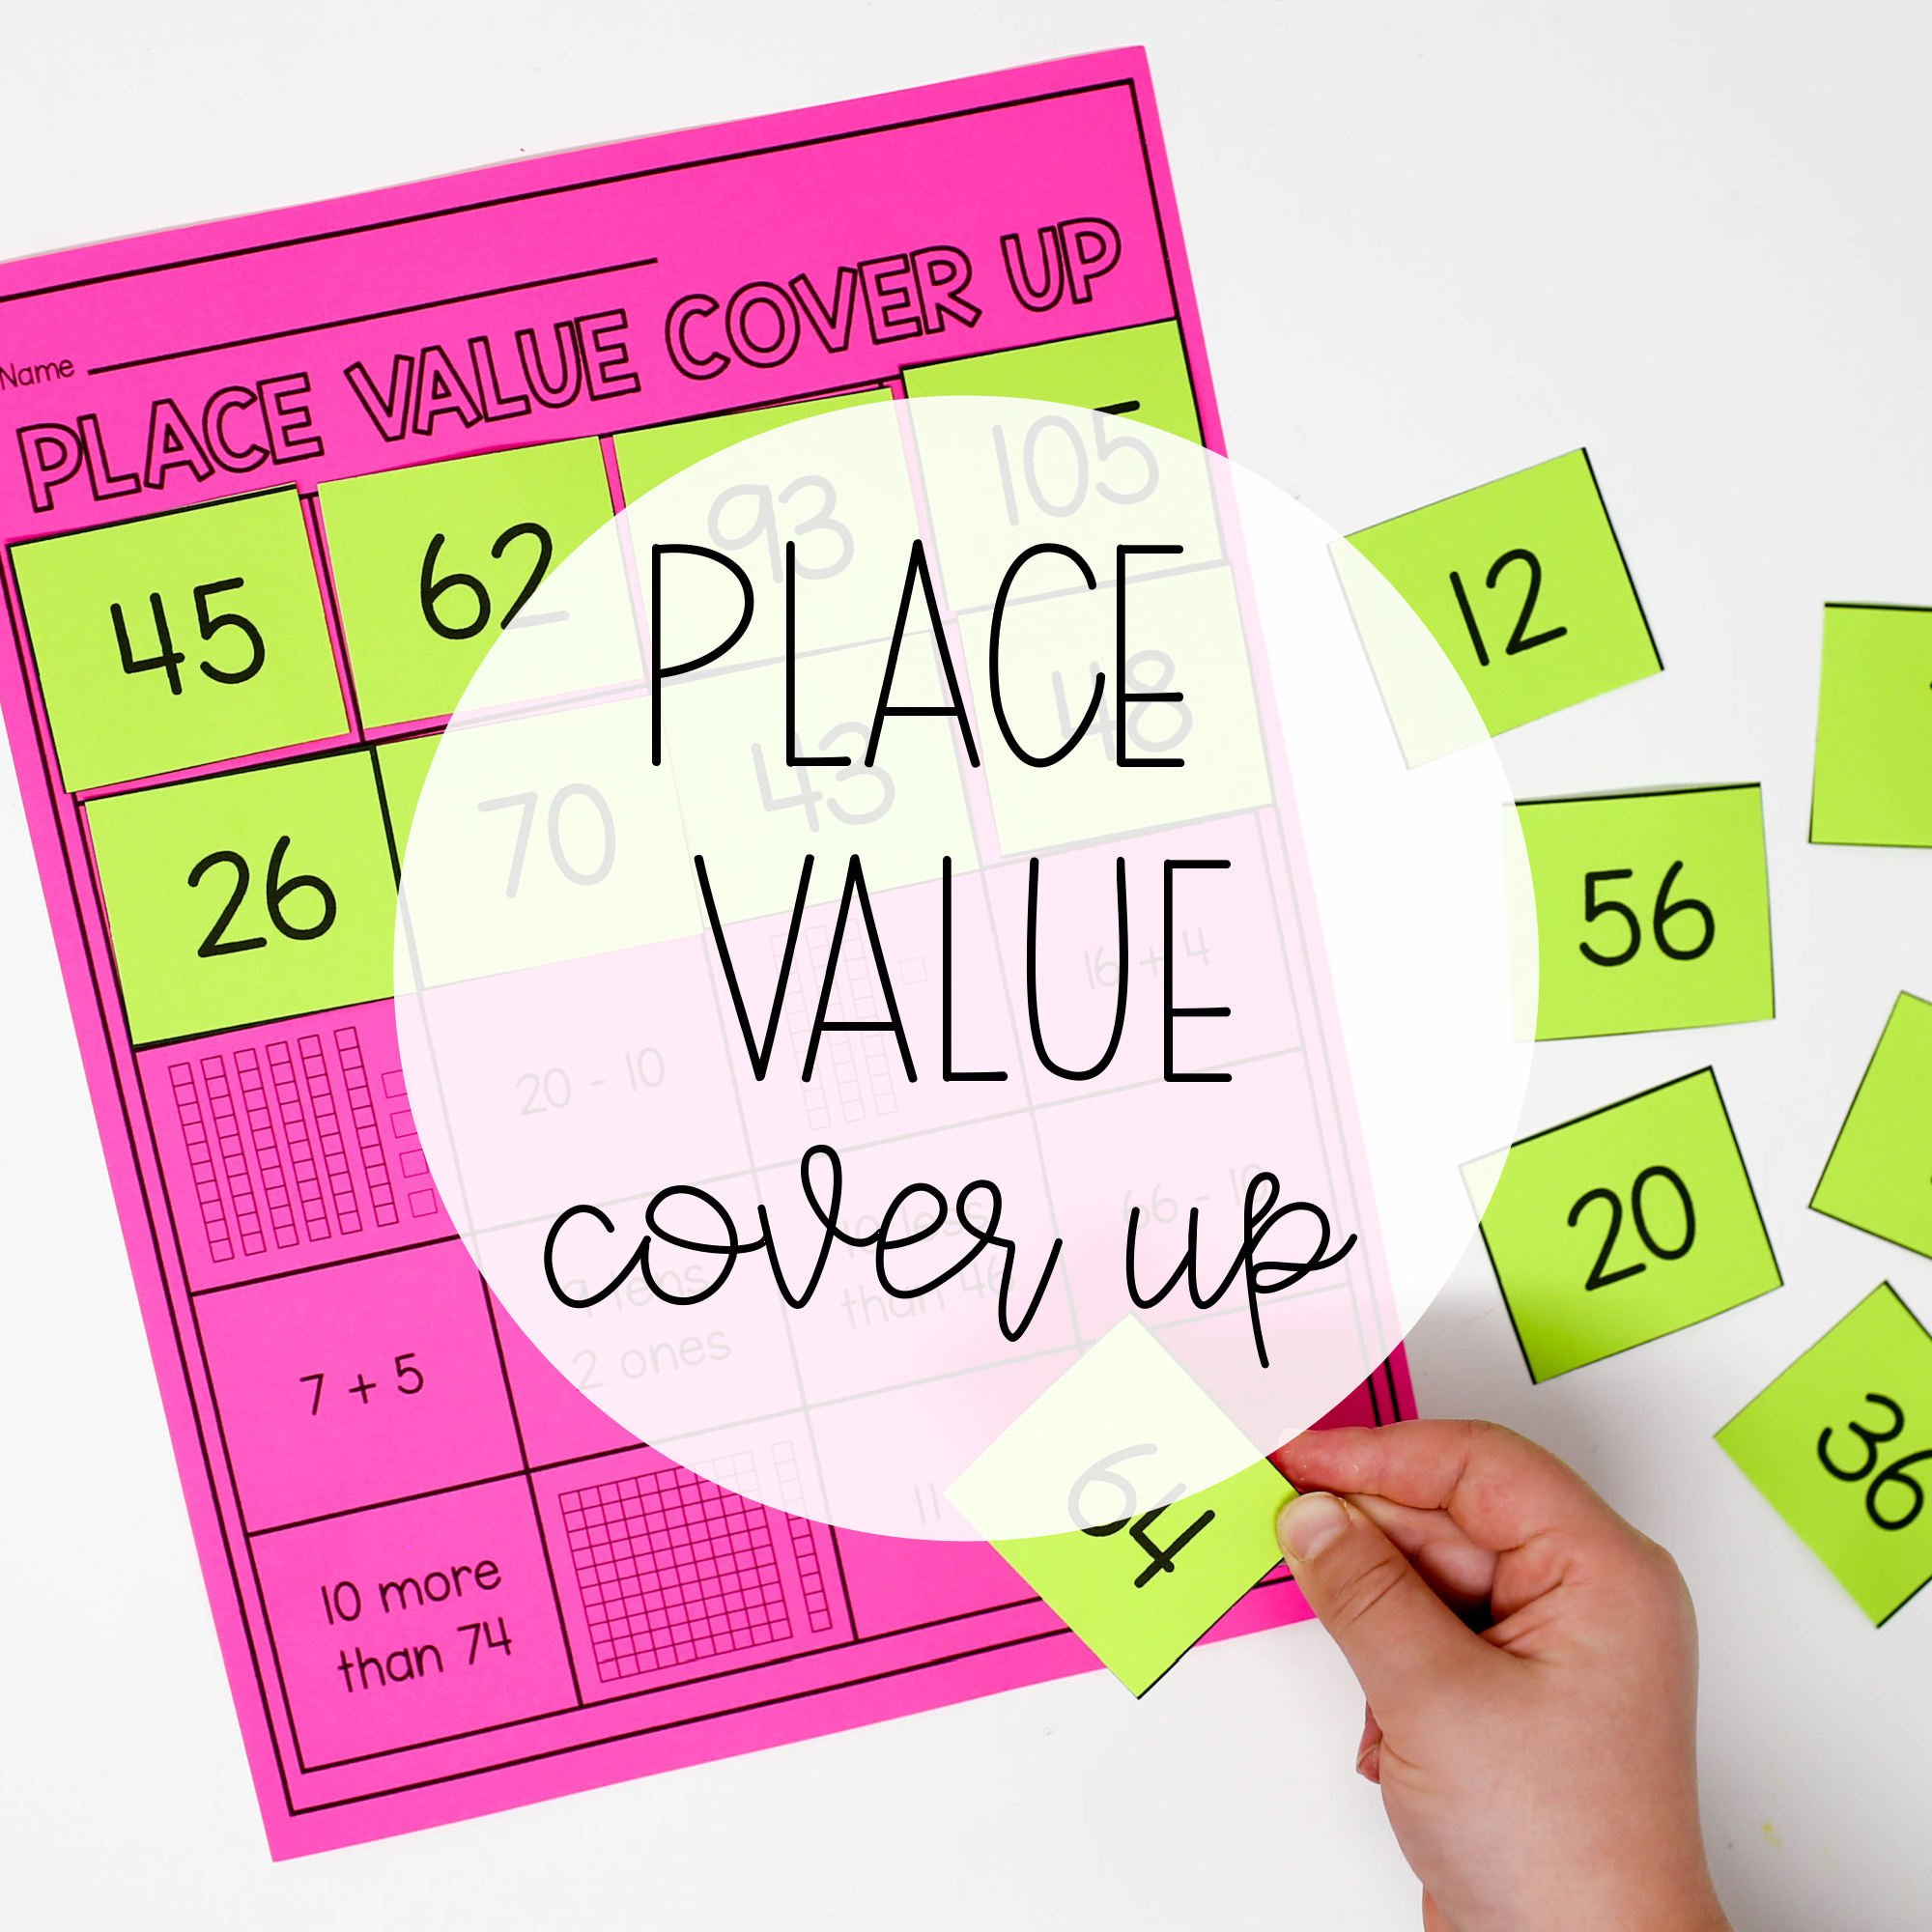 Place Value Cover Ups